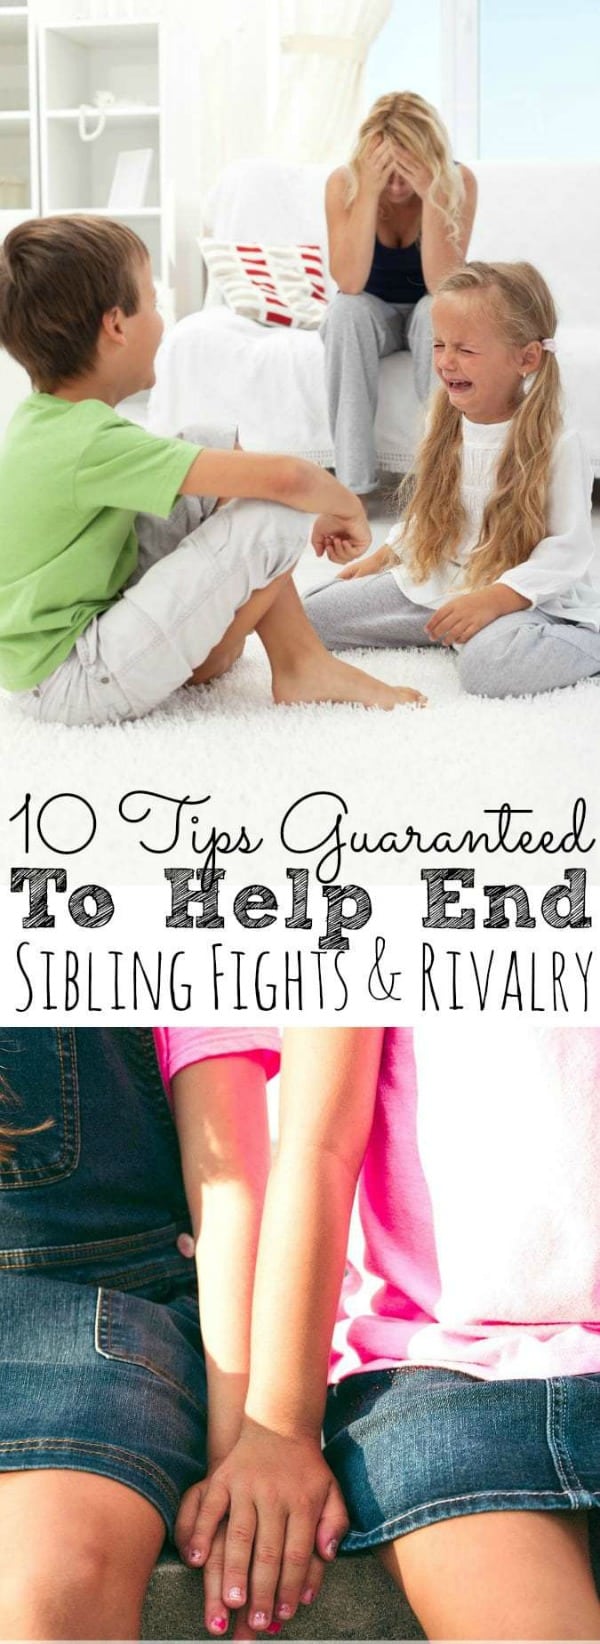 Parenting Tips To Help End Sibling fighting - simplytodaylife.com